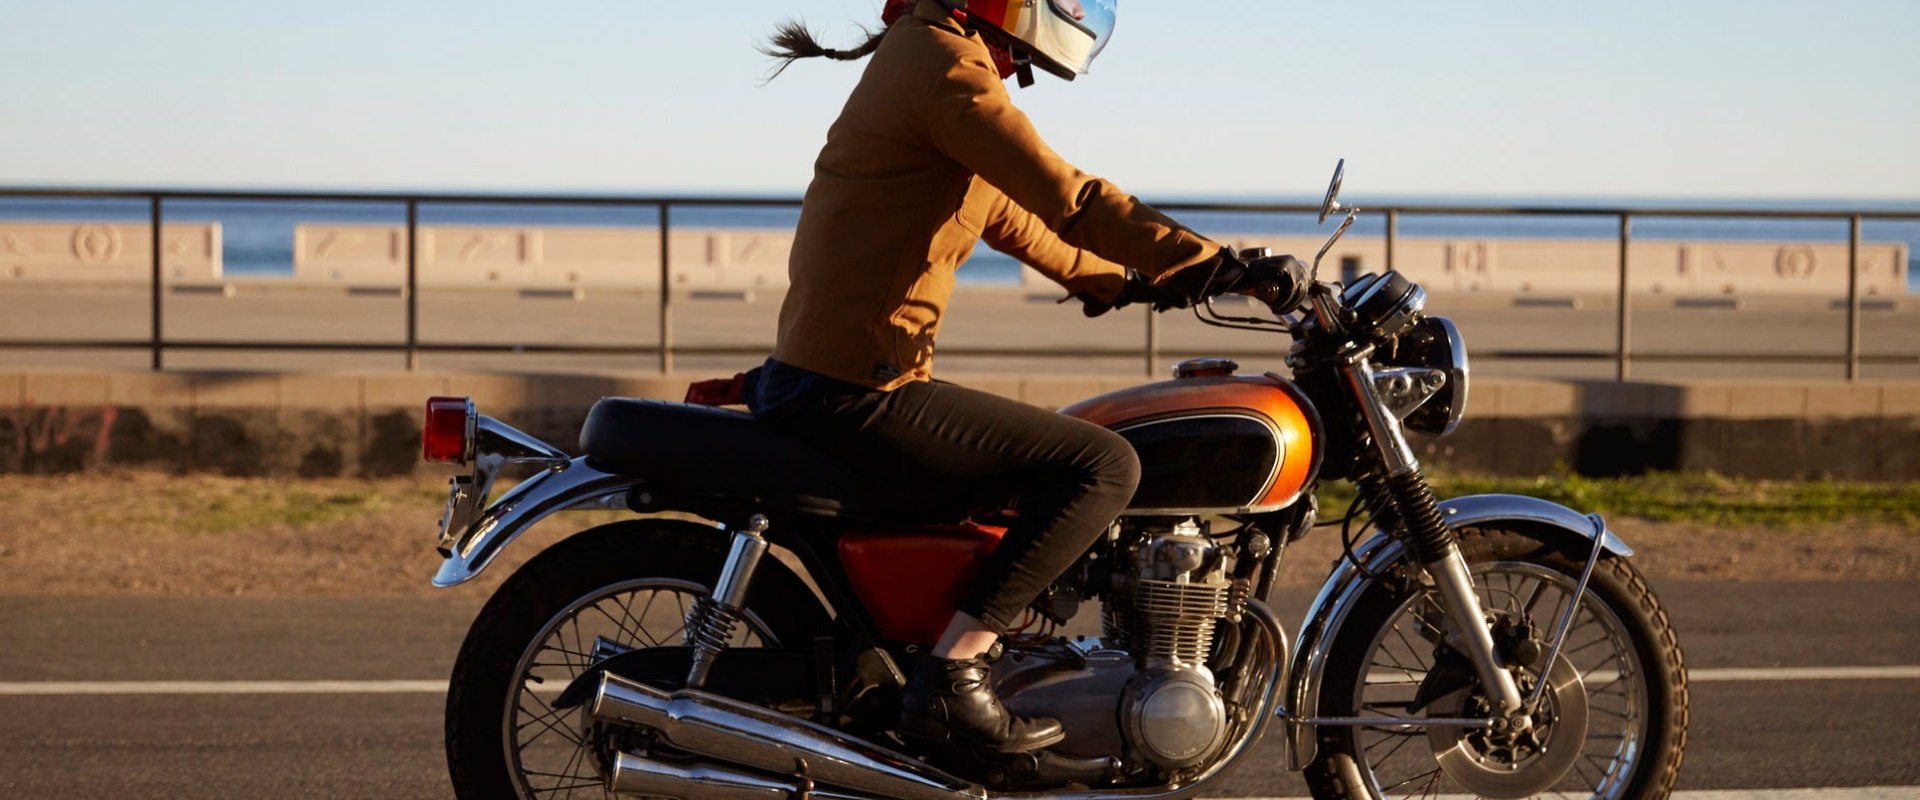 How Much Does Motorcycle Insurance Cost In Texas?